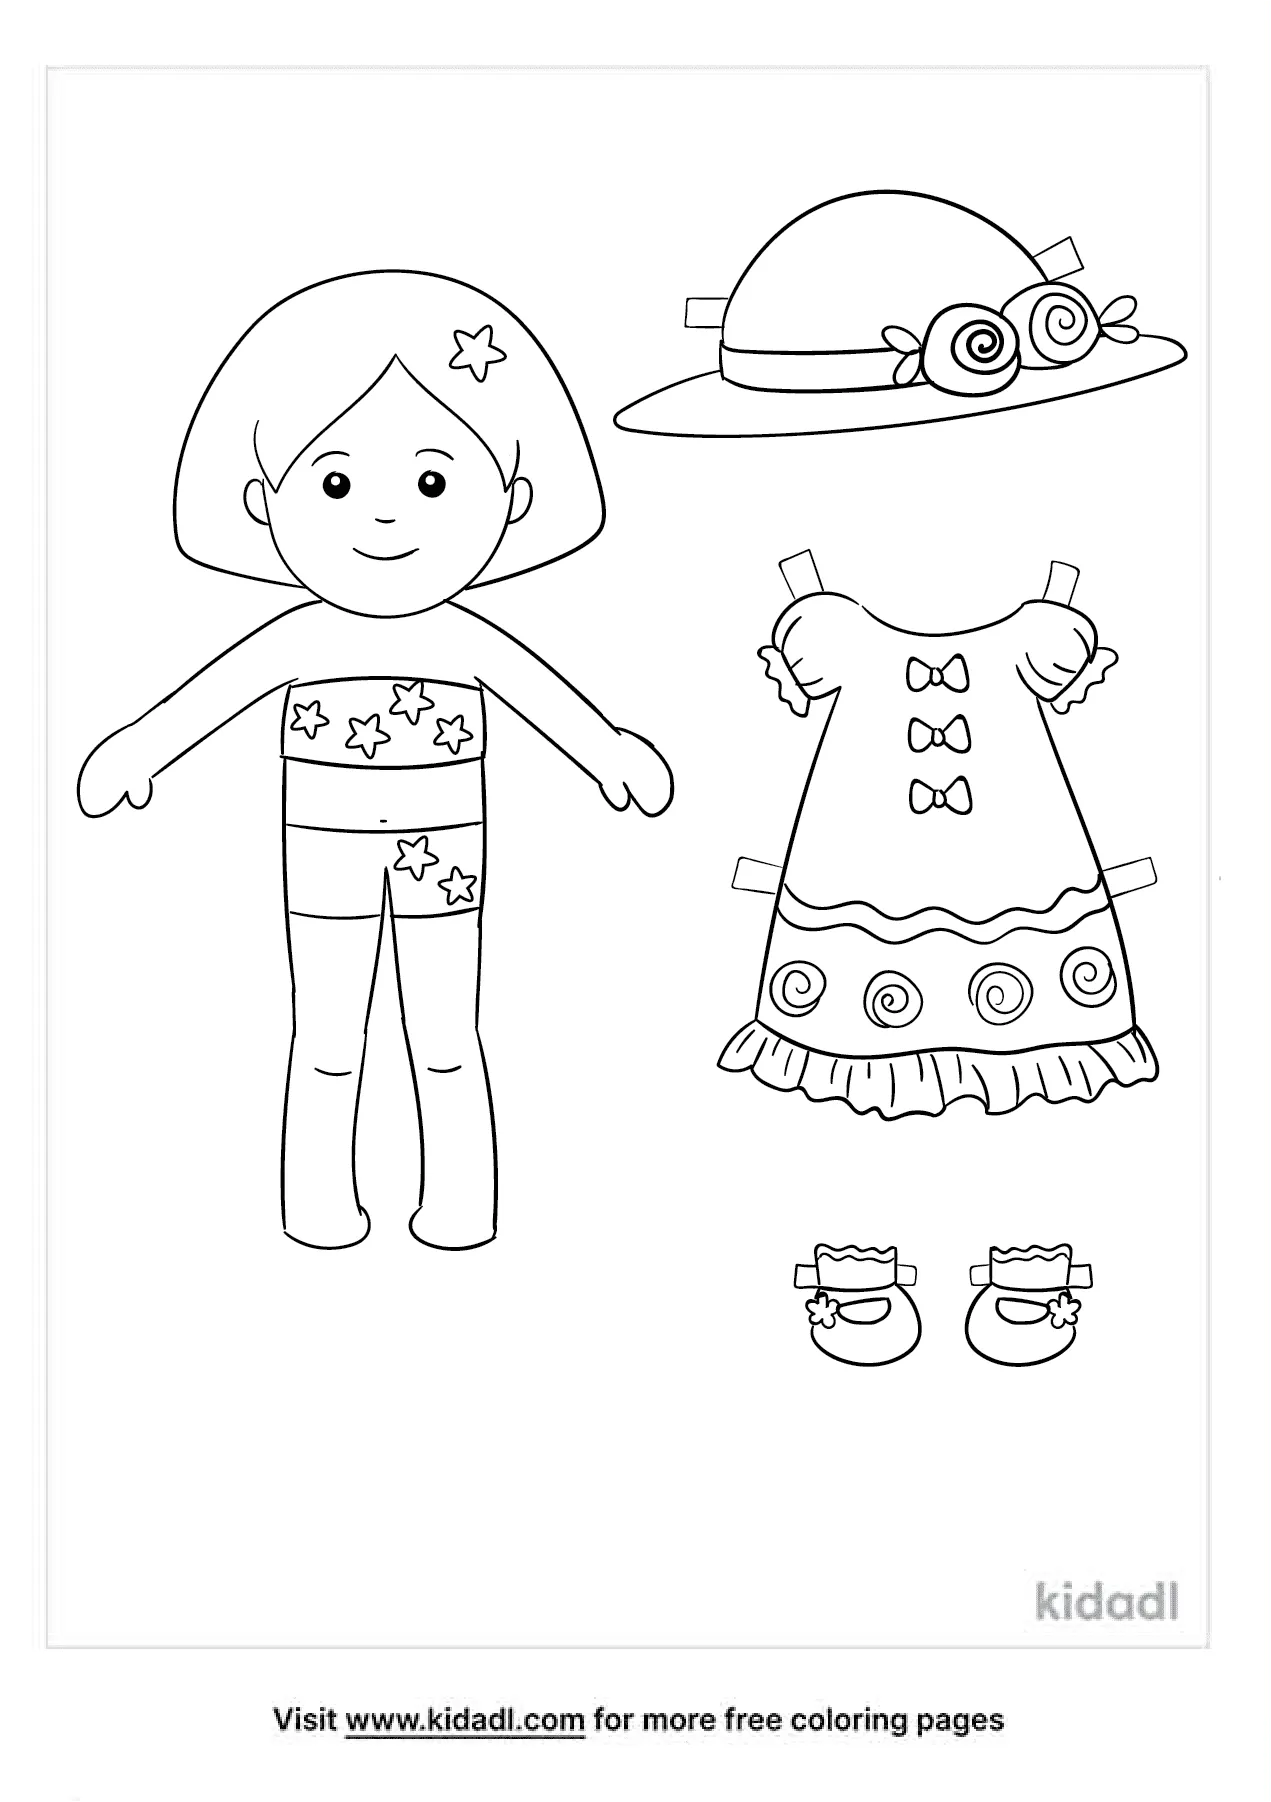 doll-clothes-patterns-doll-patterns-paper-toys-paper-crafts